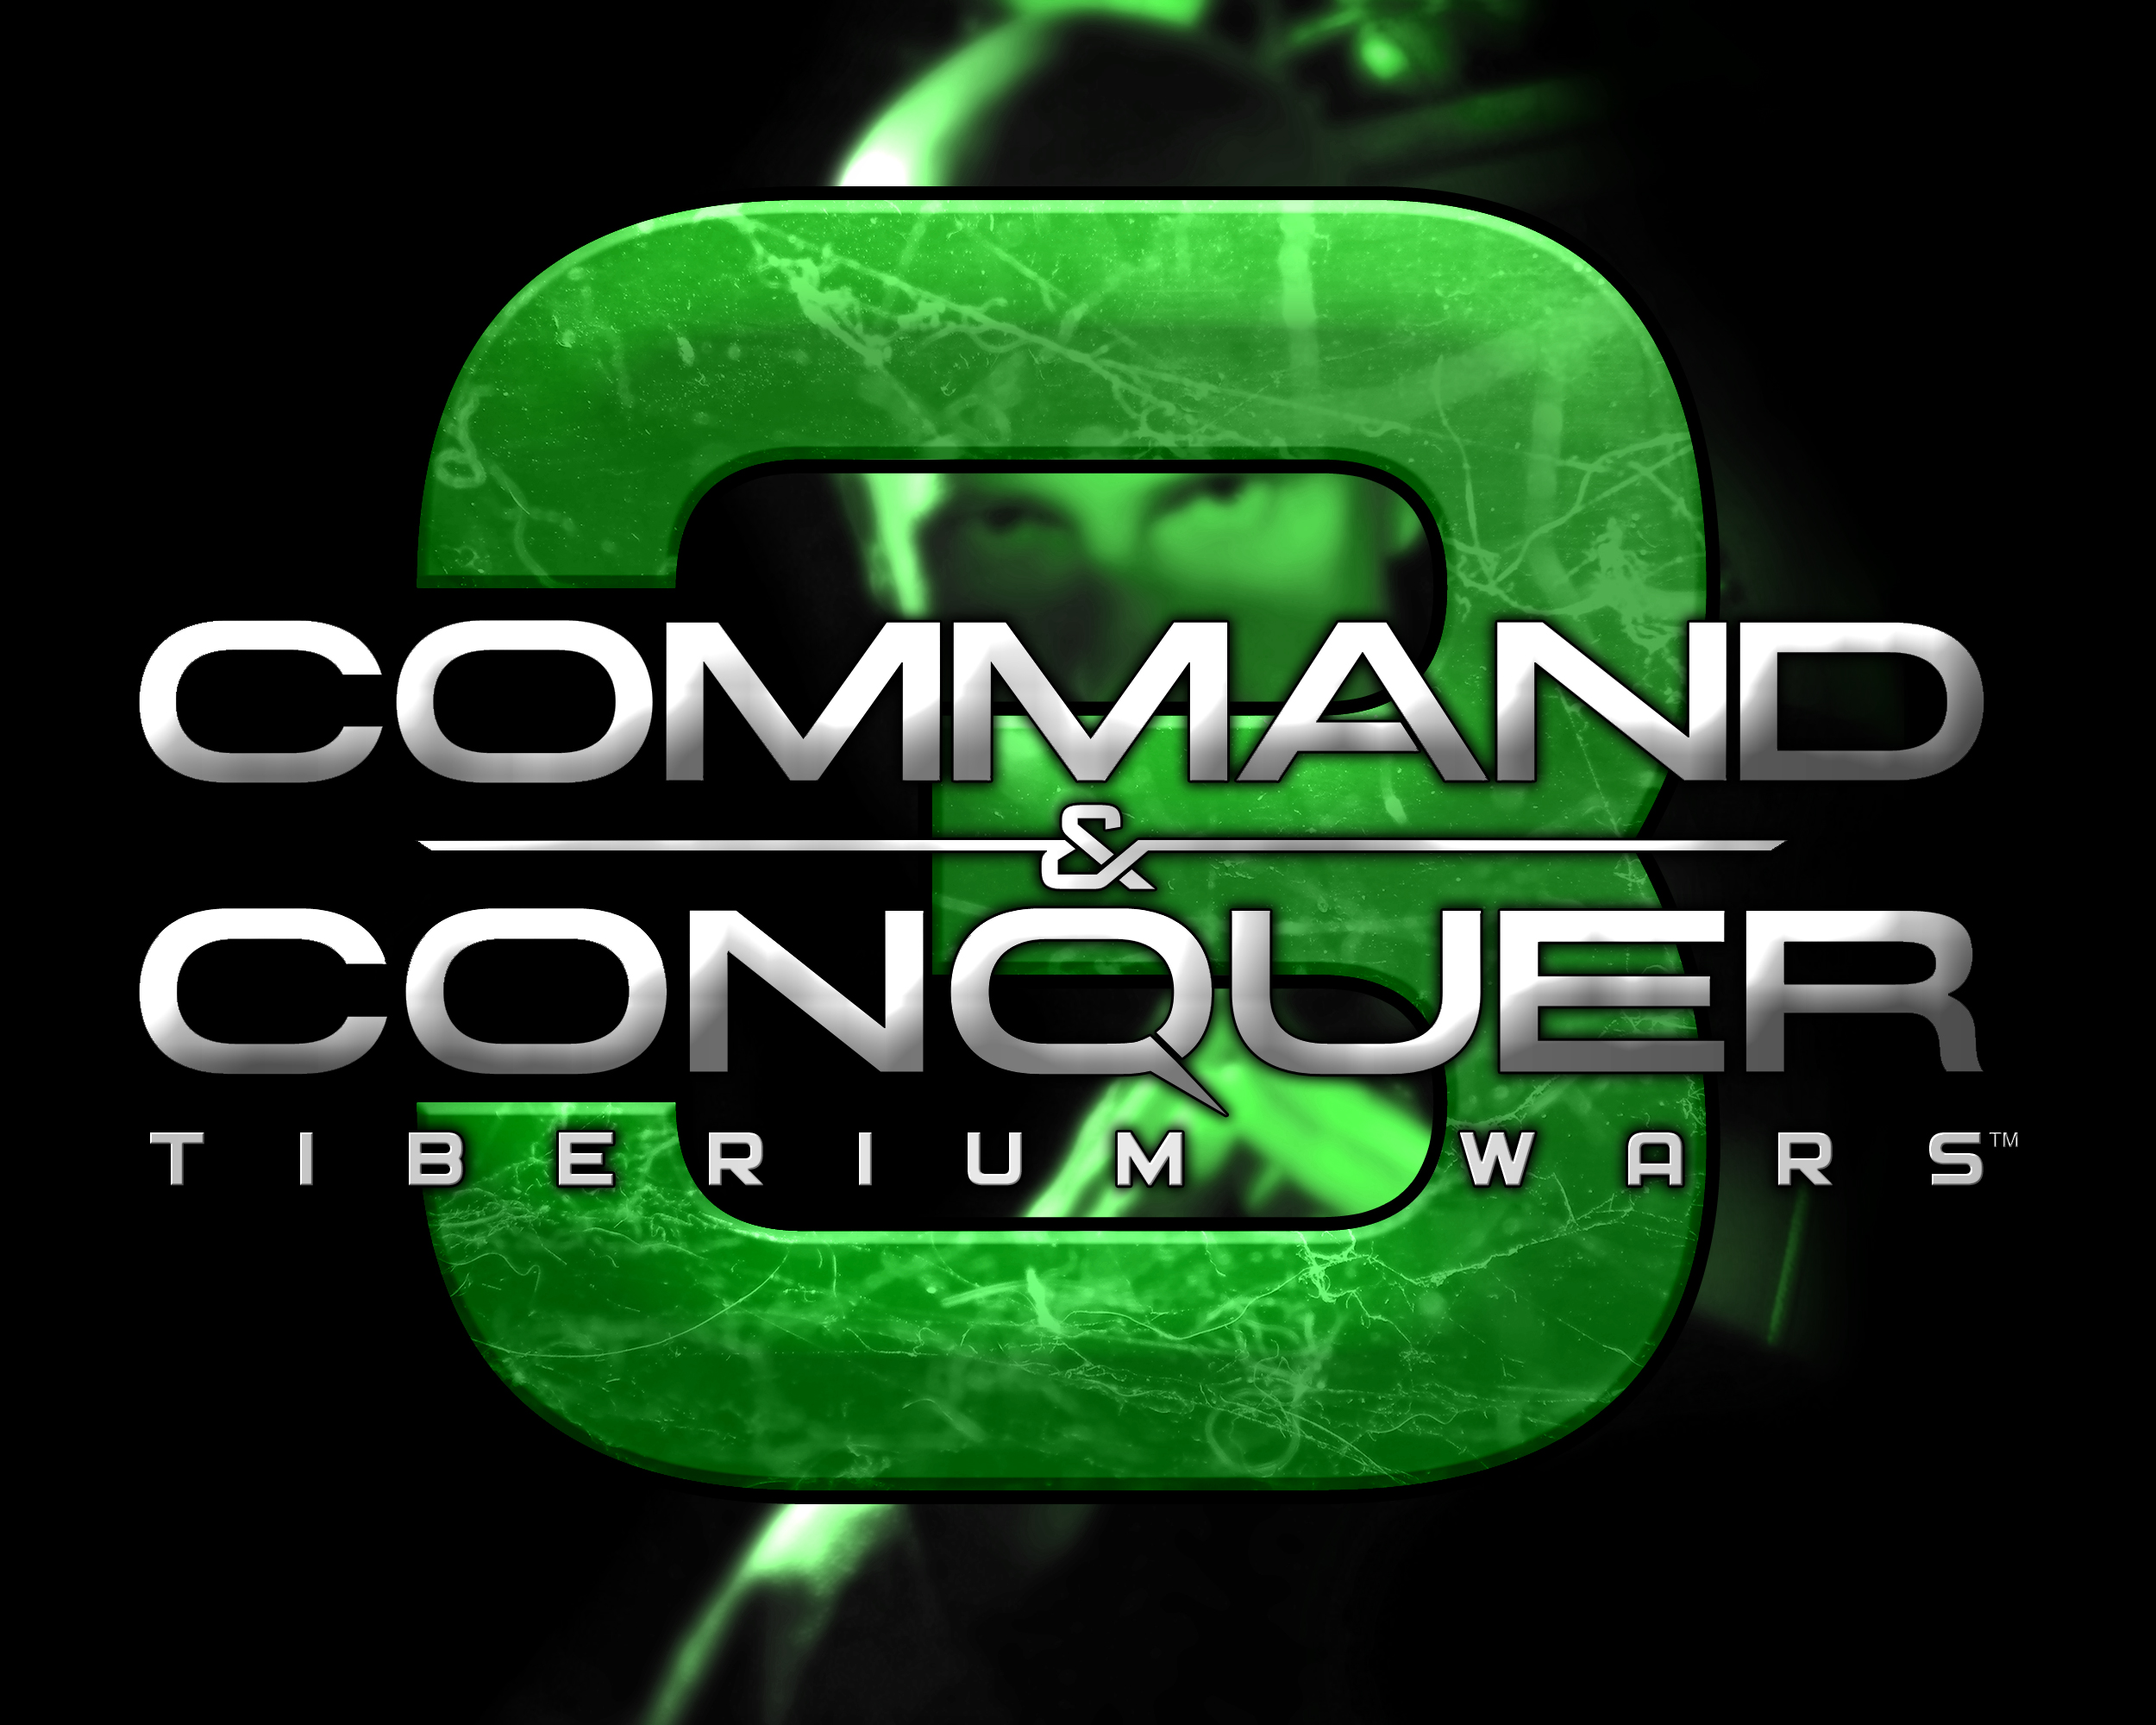 Command and conquer стим фото 41